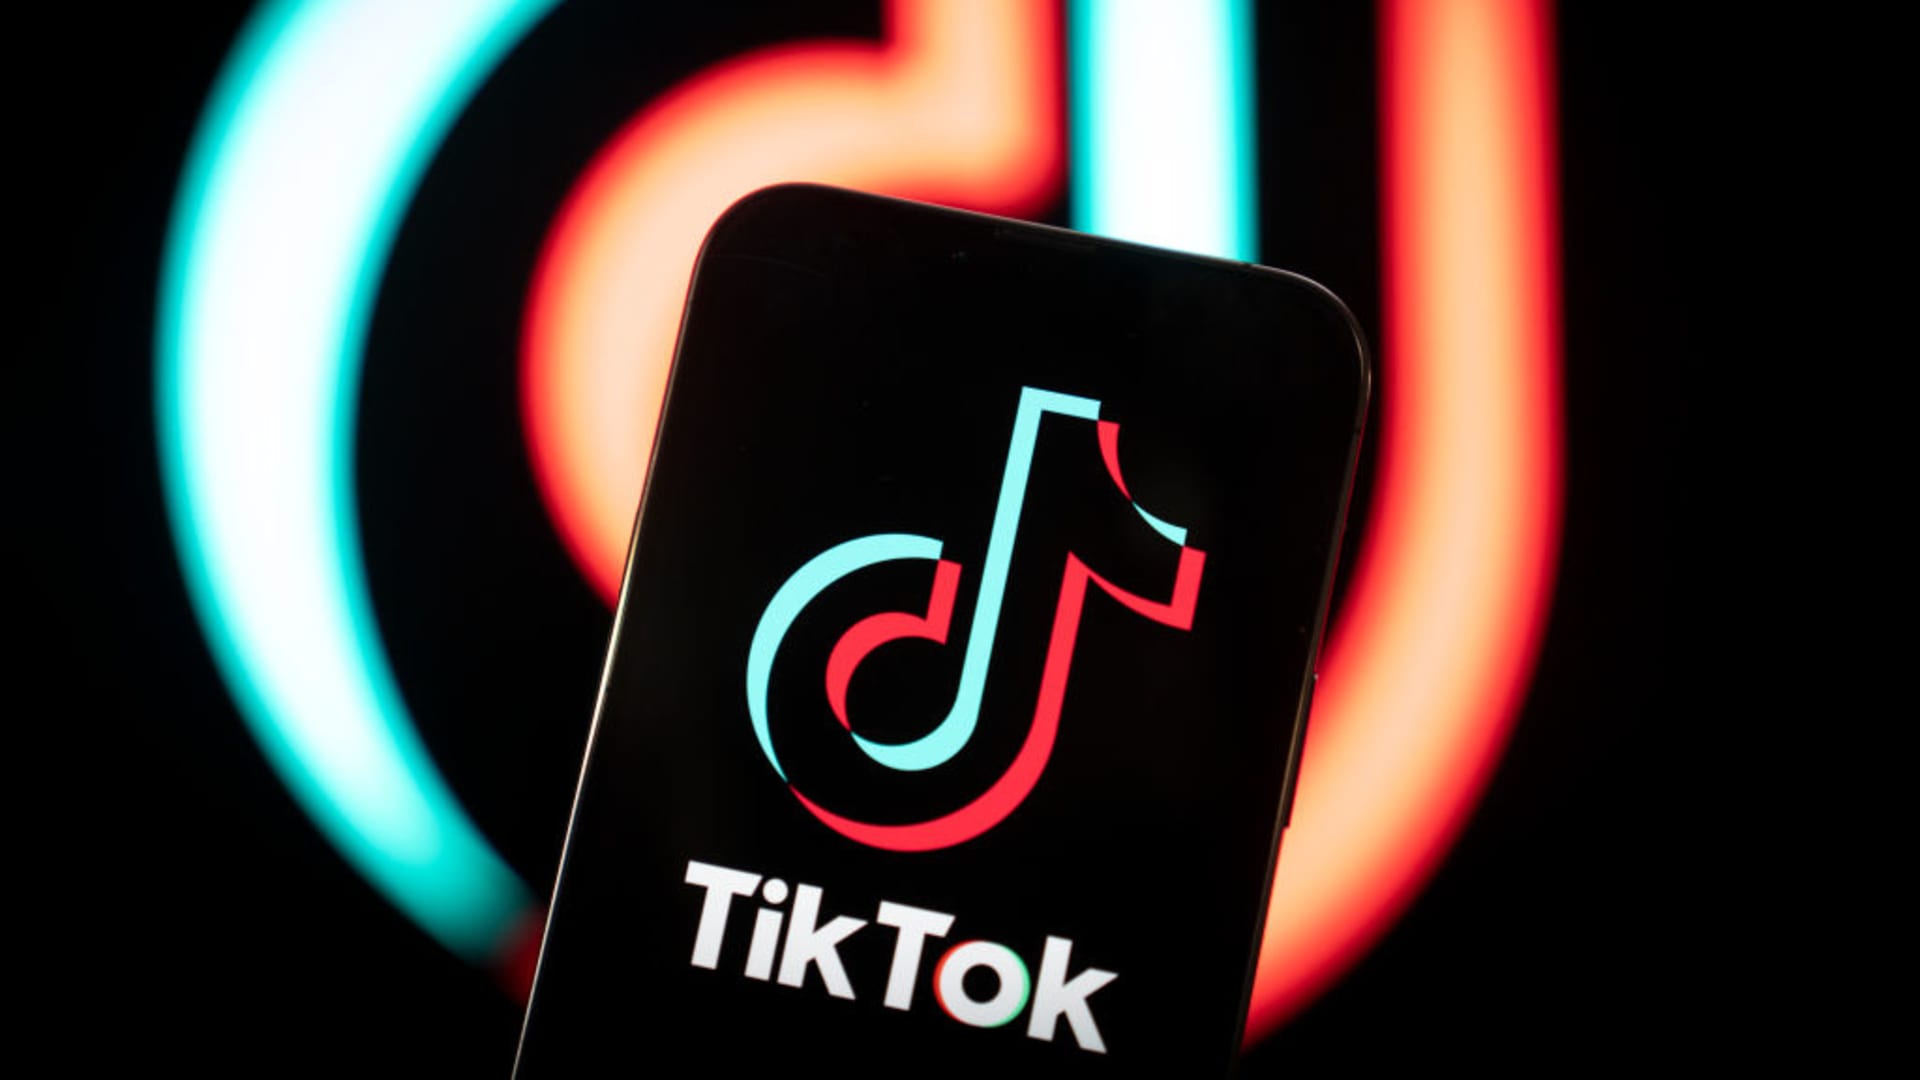 Biden says he'll ban TikTok if Congress passes bill, but he's campaigning on it until then